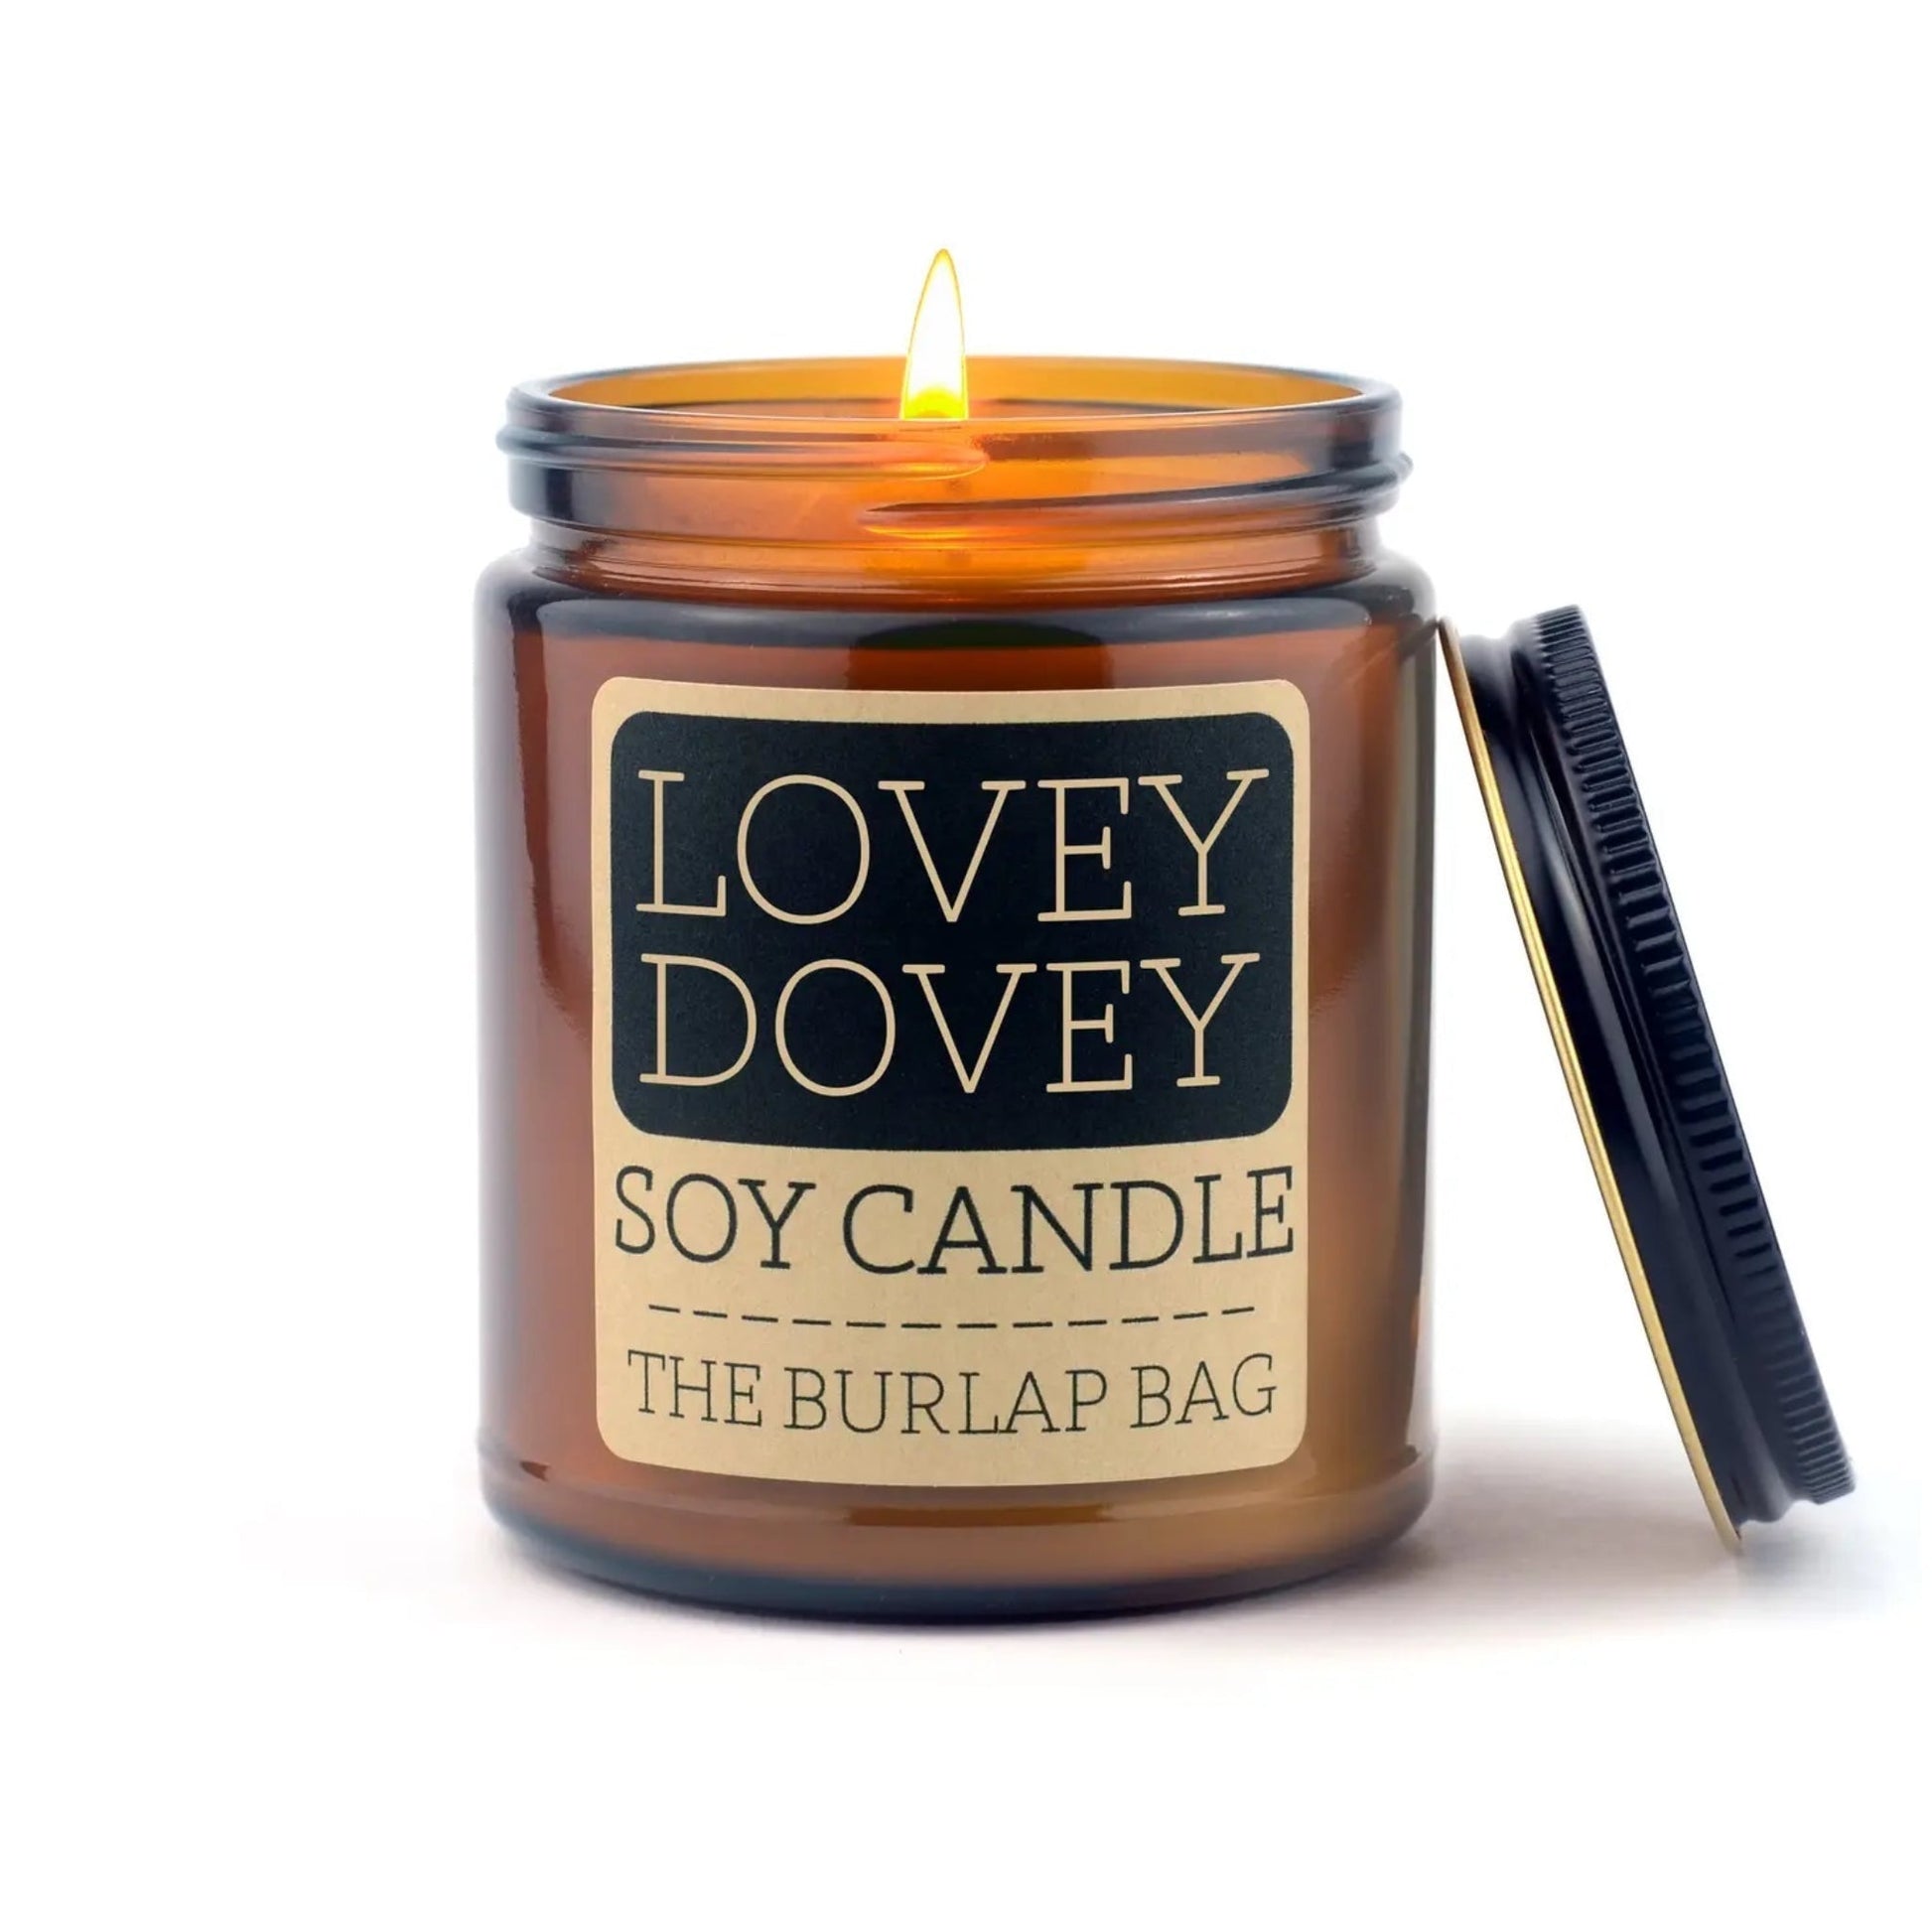 The Burlap Bag Soy Candle - Lovey Dovey - Made in the USA